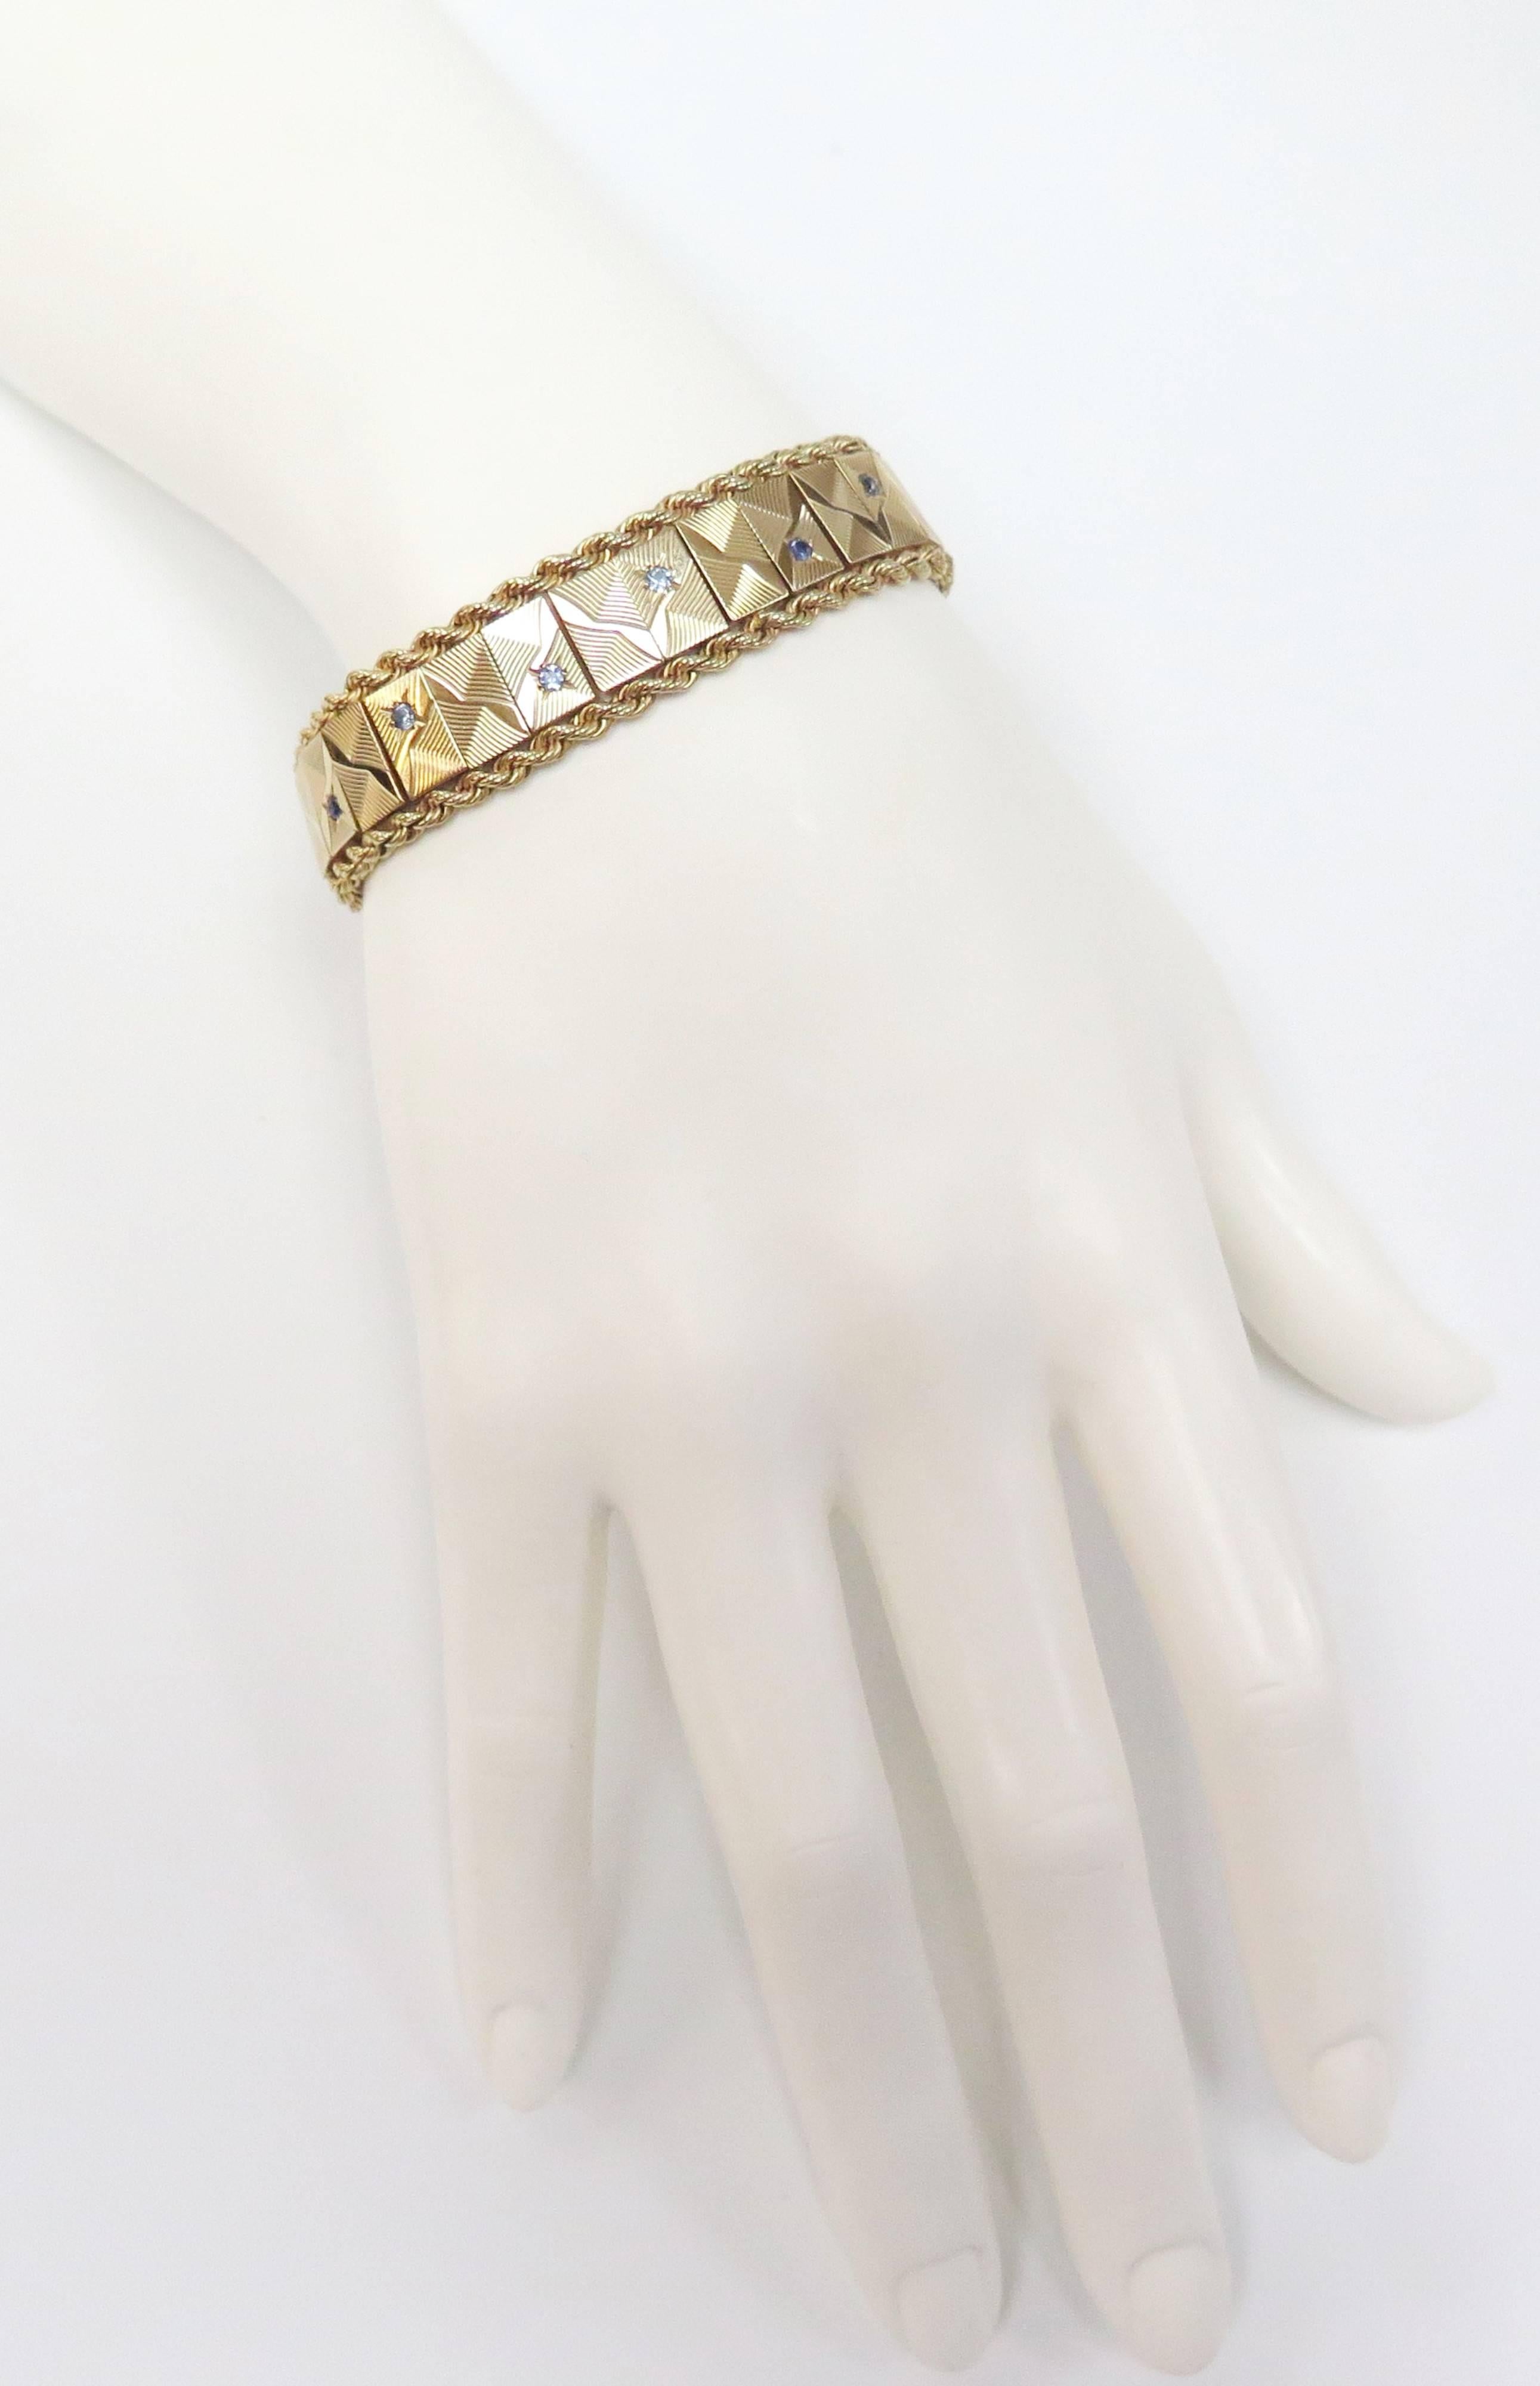 Women's 1950s Bracelet with Sapphires in Faceted Starbursts, 14 Karat Yellow Gold For Sale